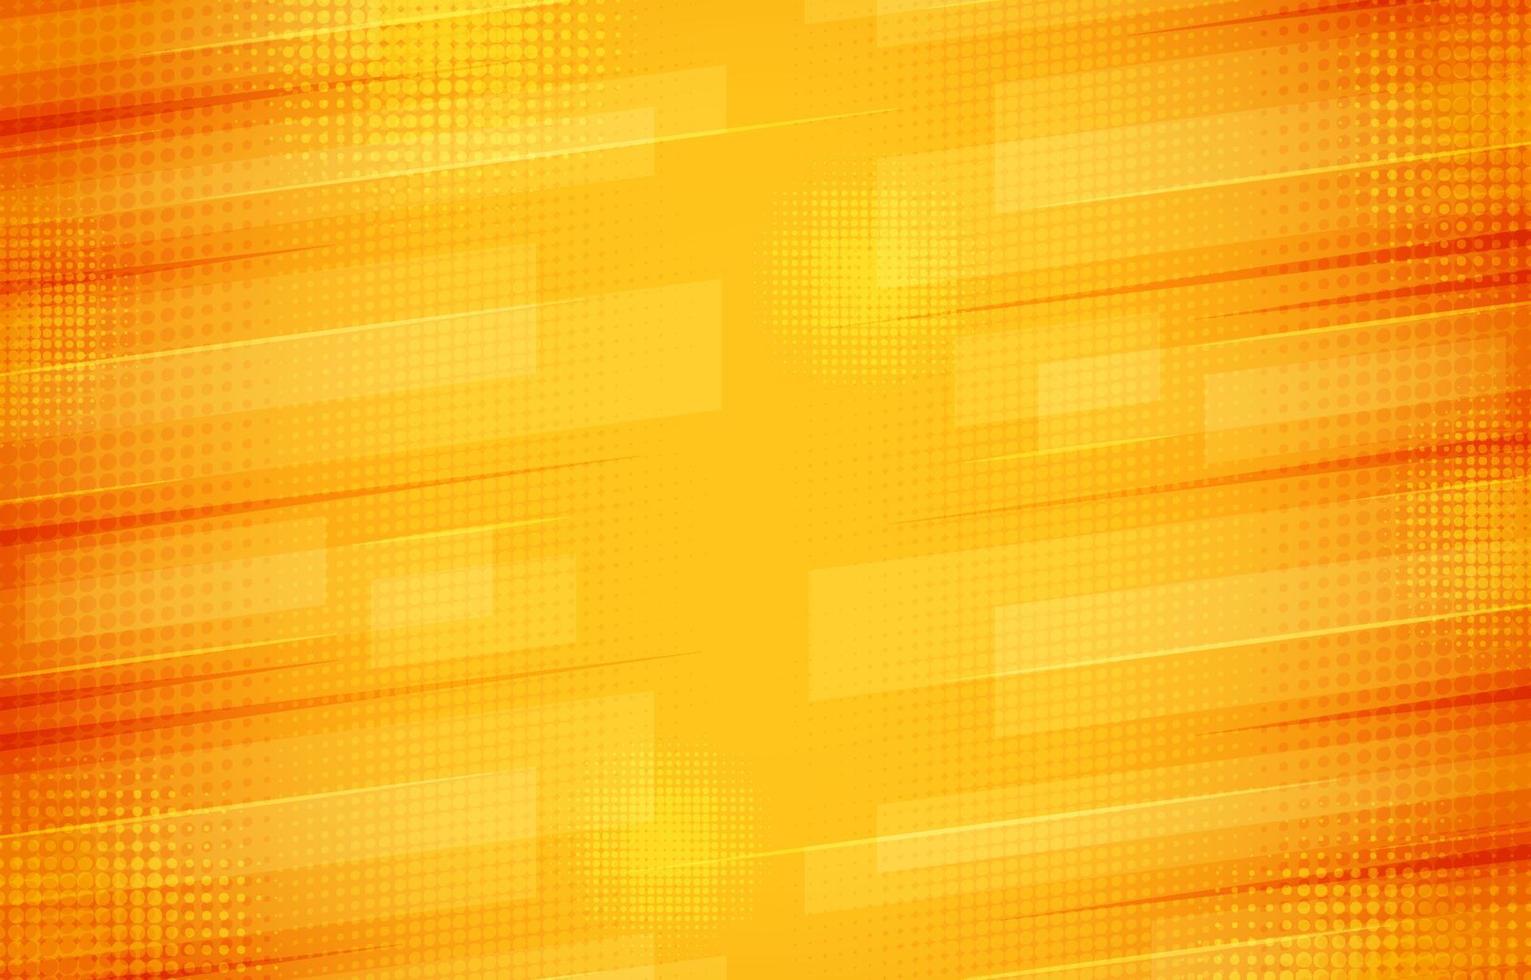 Yellow Abstract Halftone Background Template vector